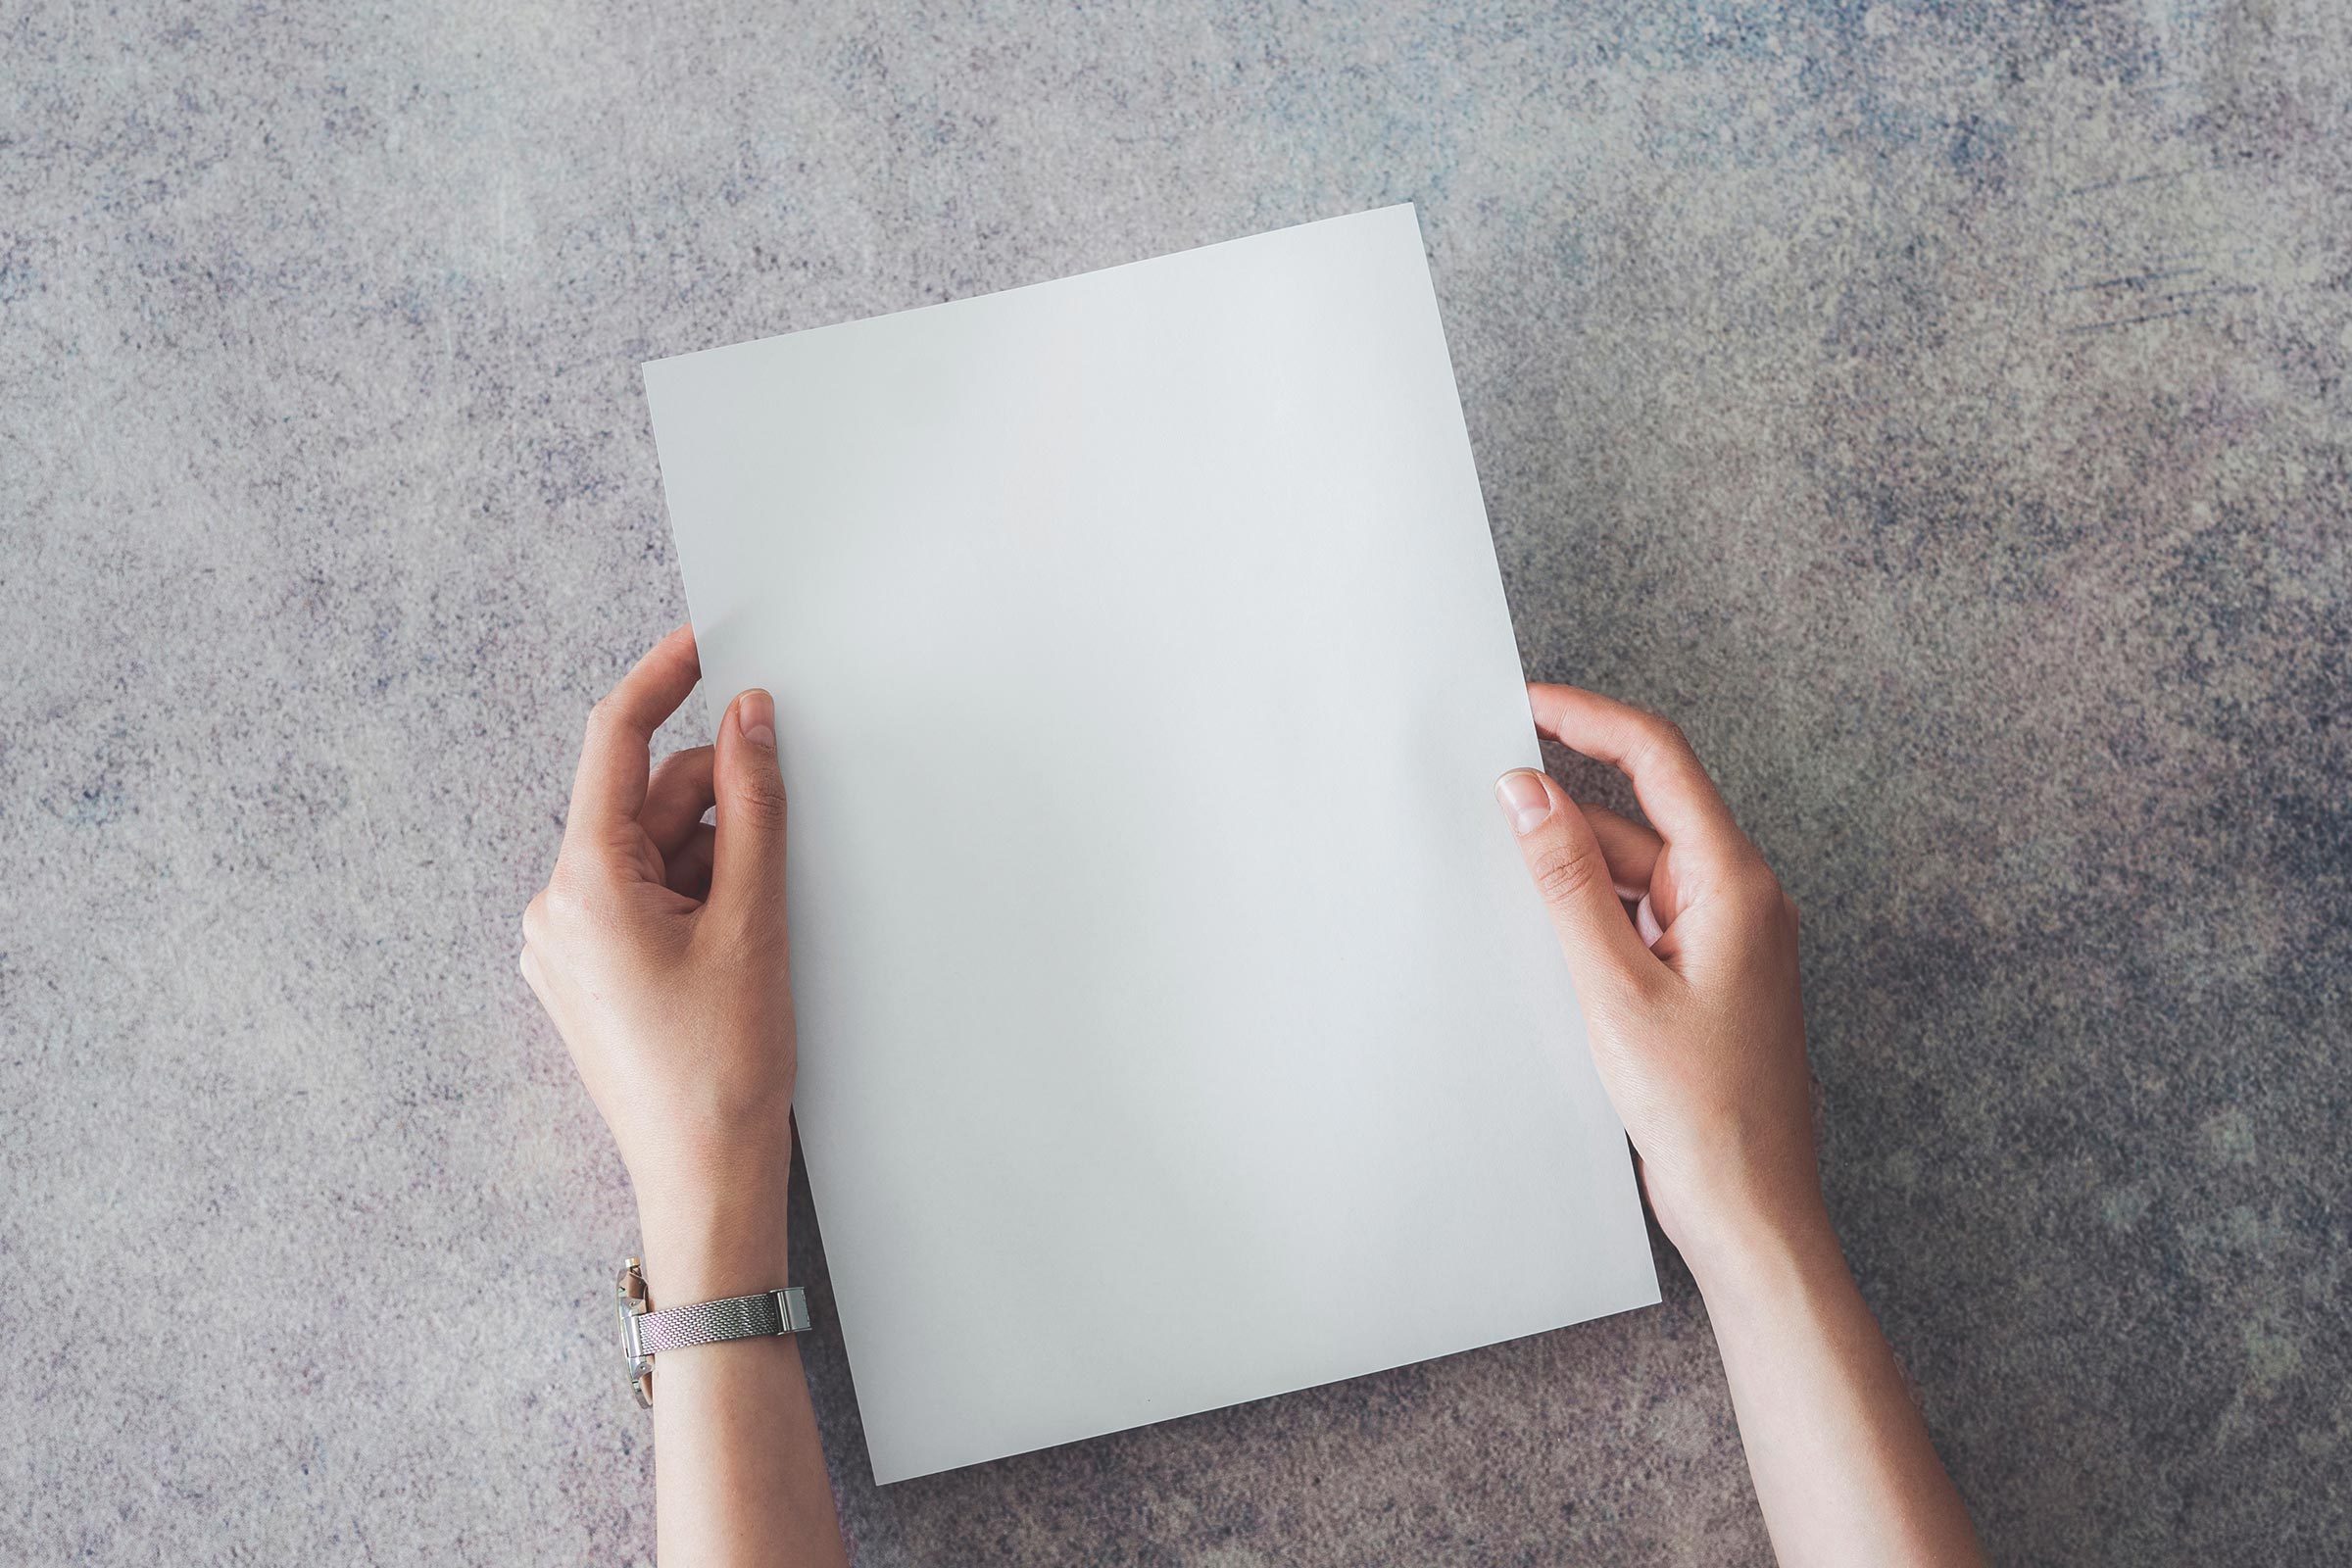 Facts That Will Make You Use Less Paper | Reader's Digest